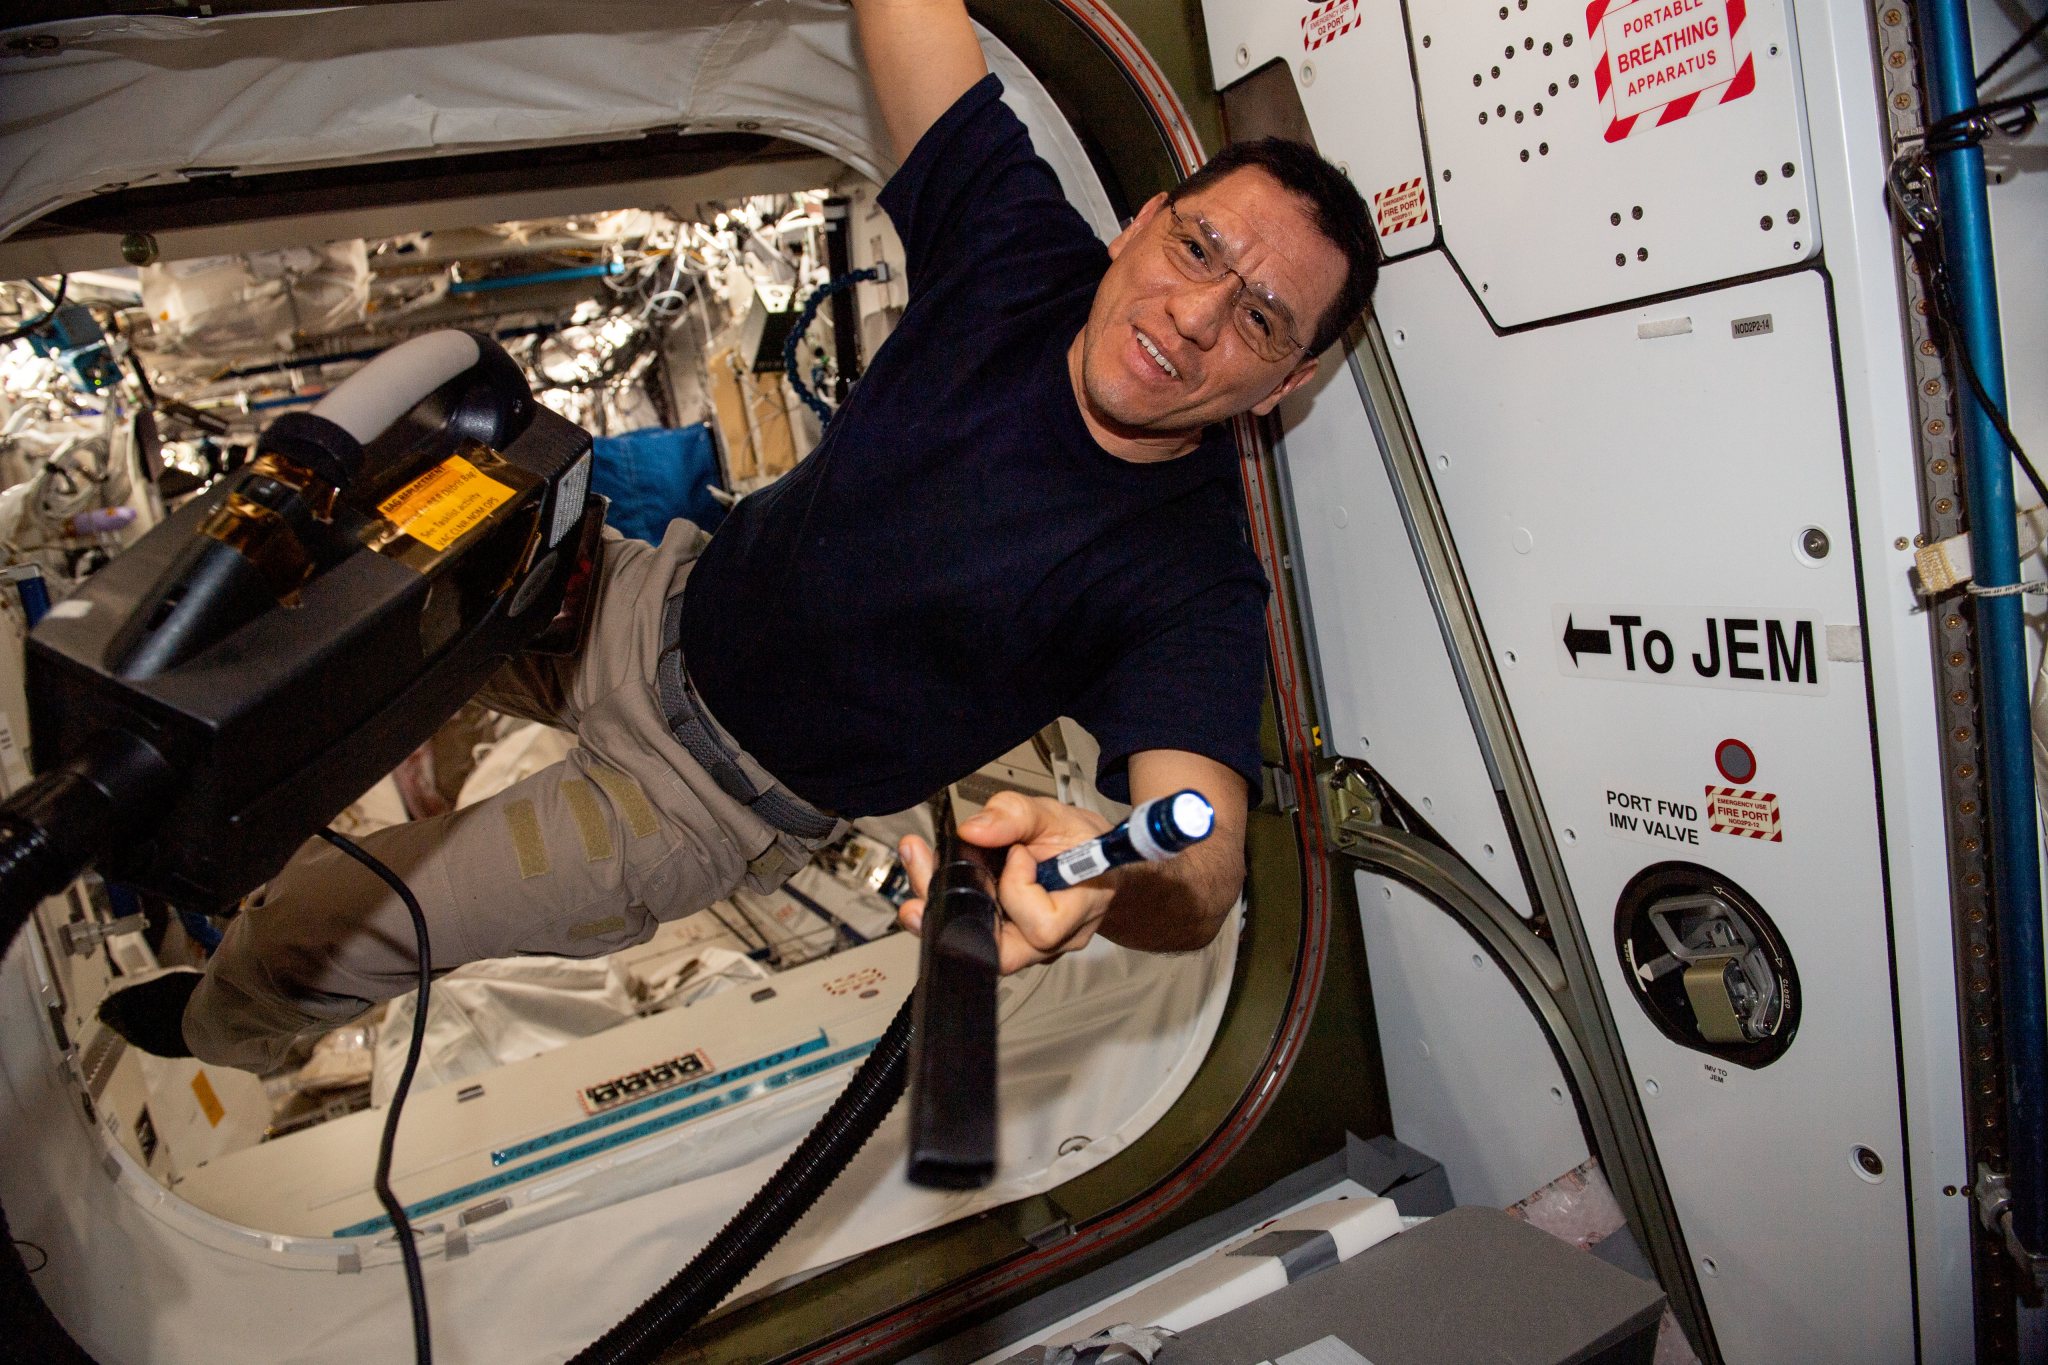 NASA astronaut and Expedition 68 Flight Engineer Frank Rubio is pictured conducting maintenance tasks inside the International Space Station's Harmony module.